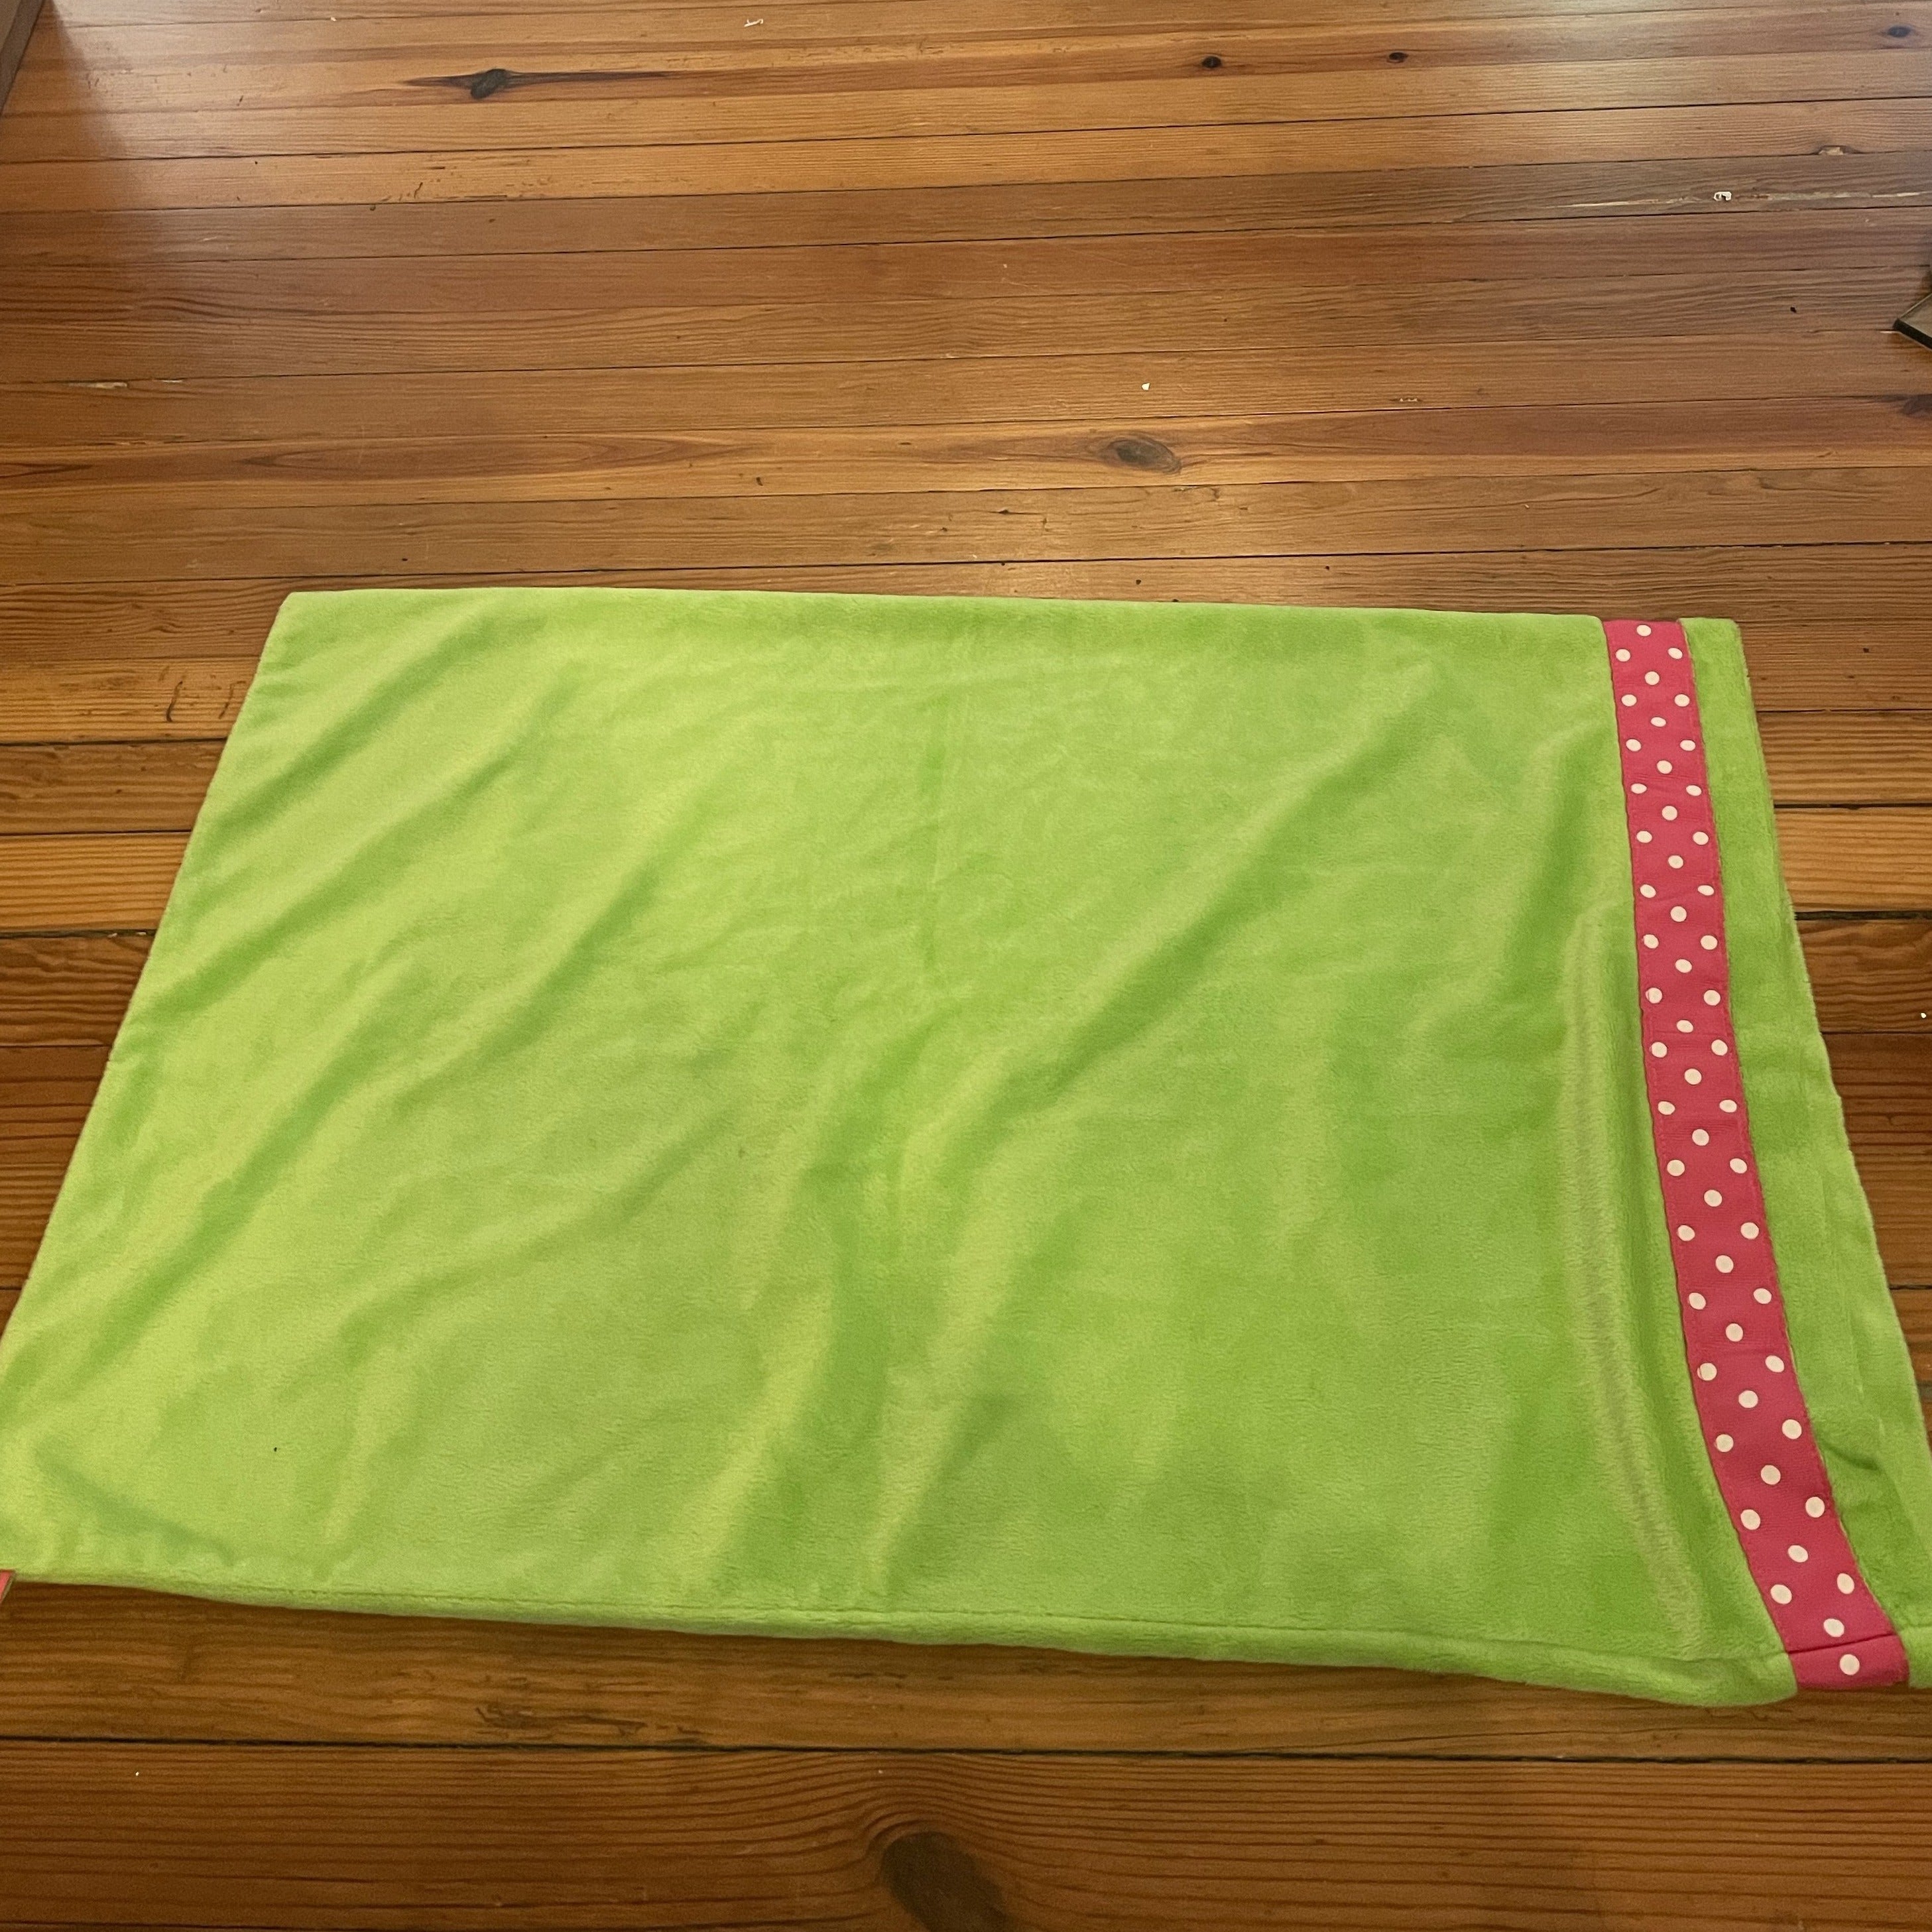 Velour Pillow Case - Lime green with pink and white polka dot trim